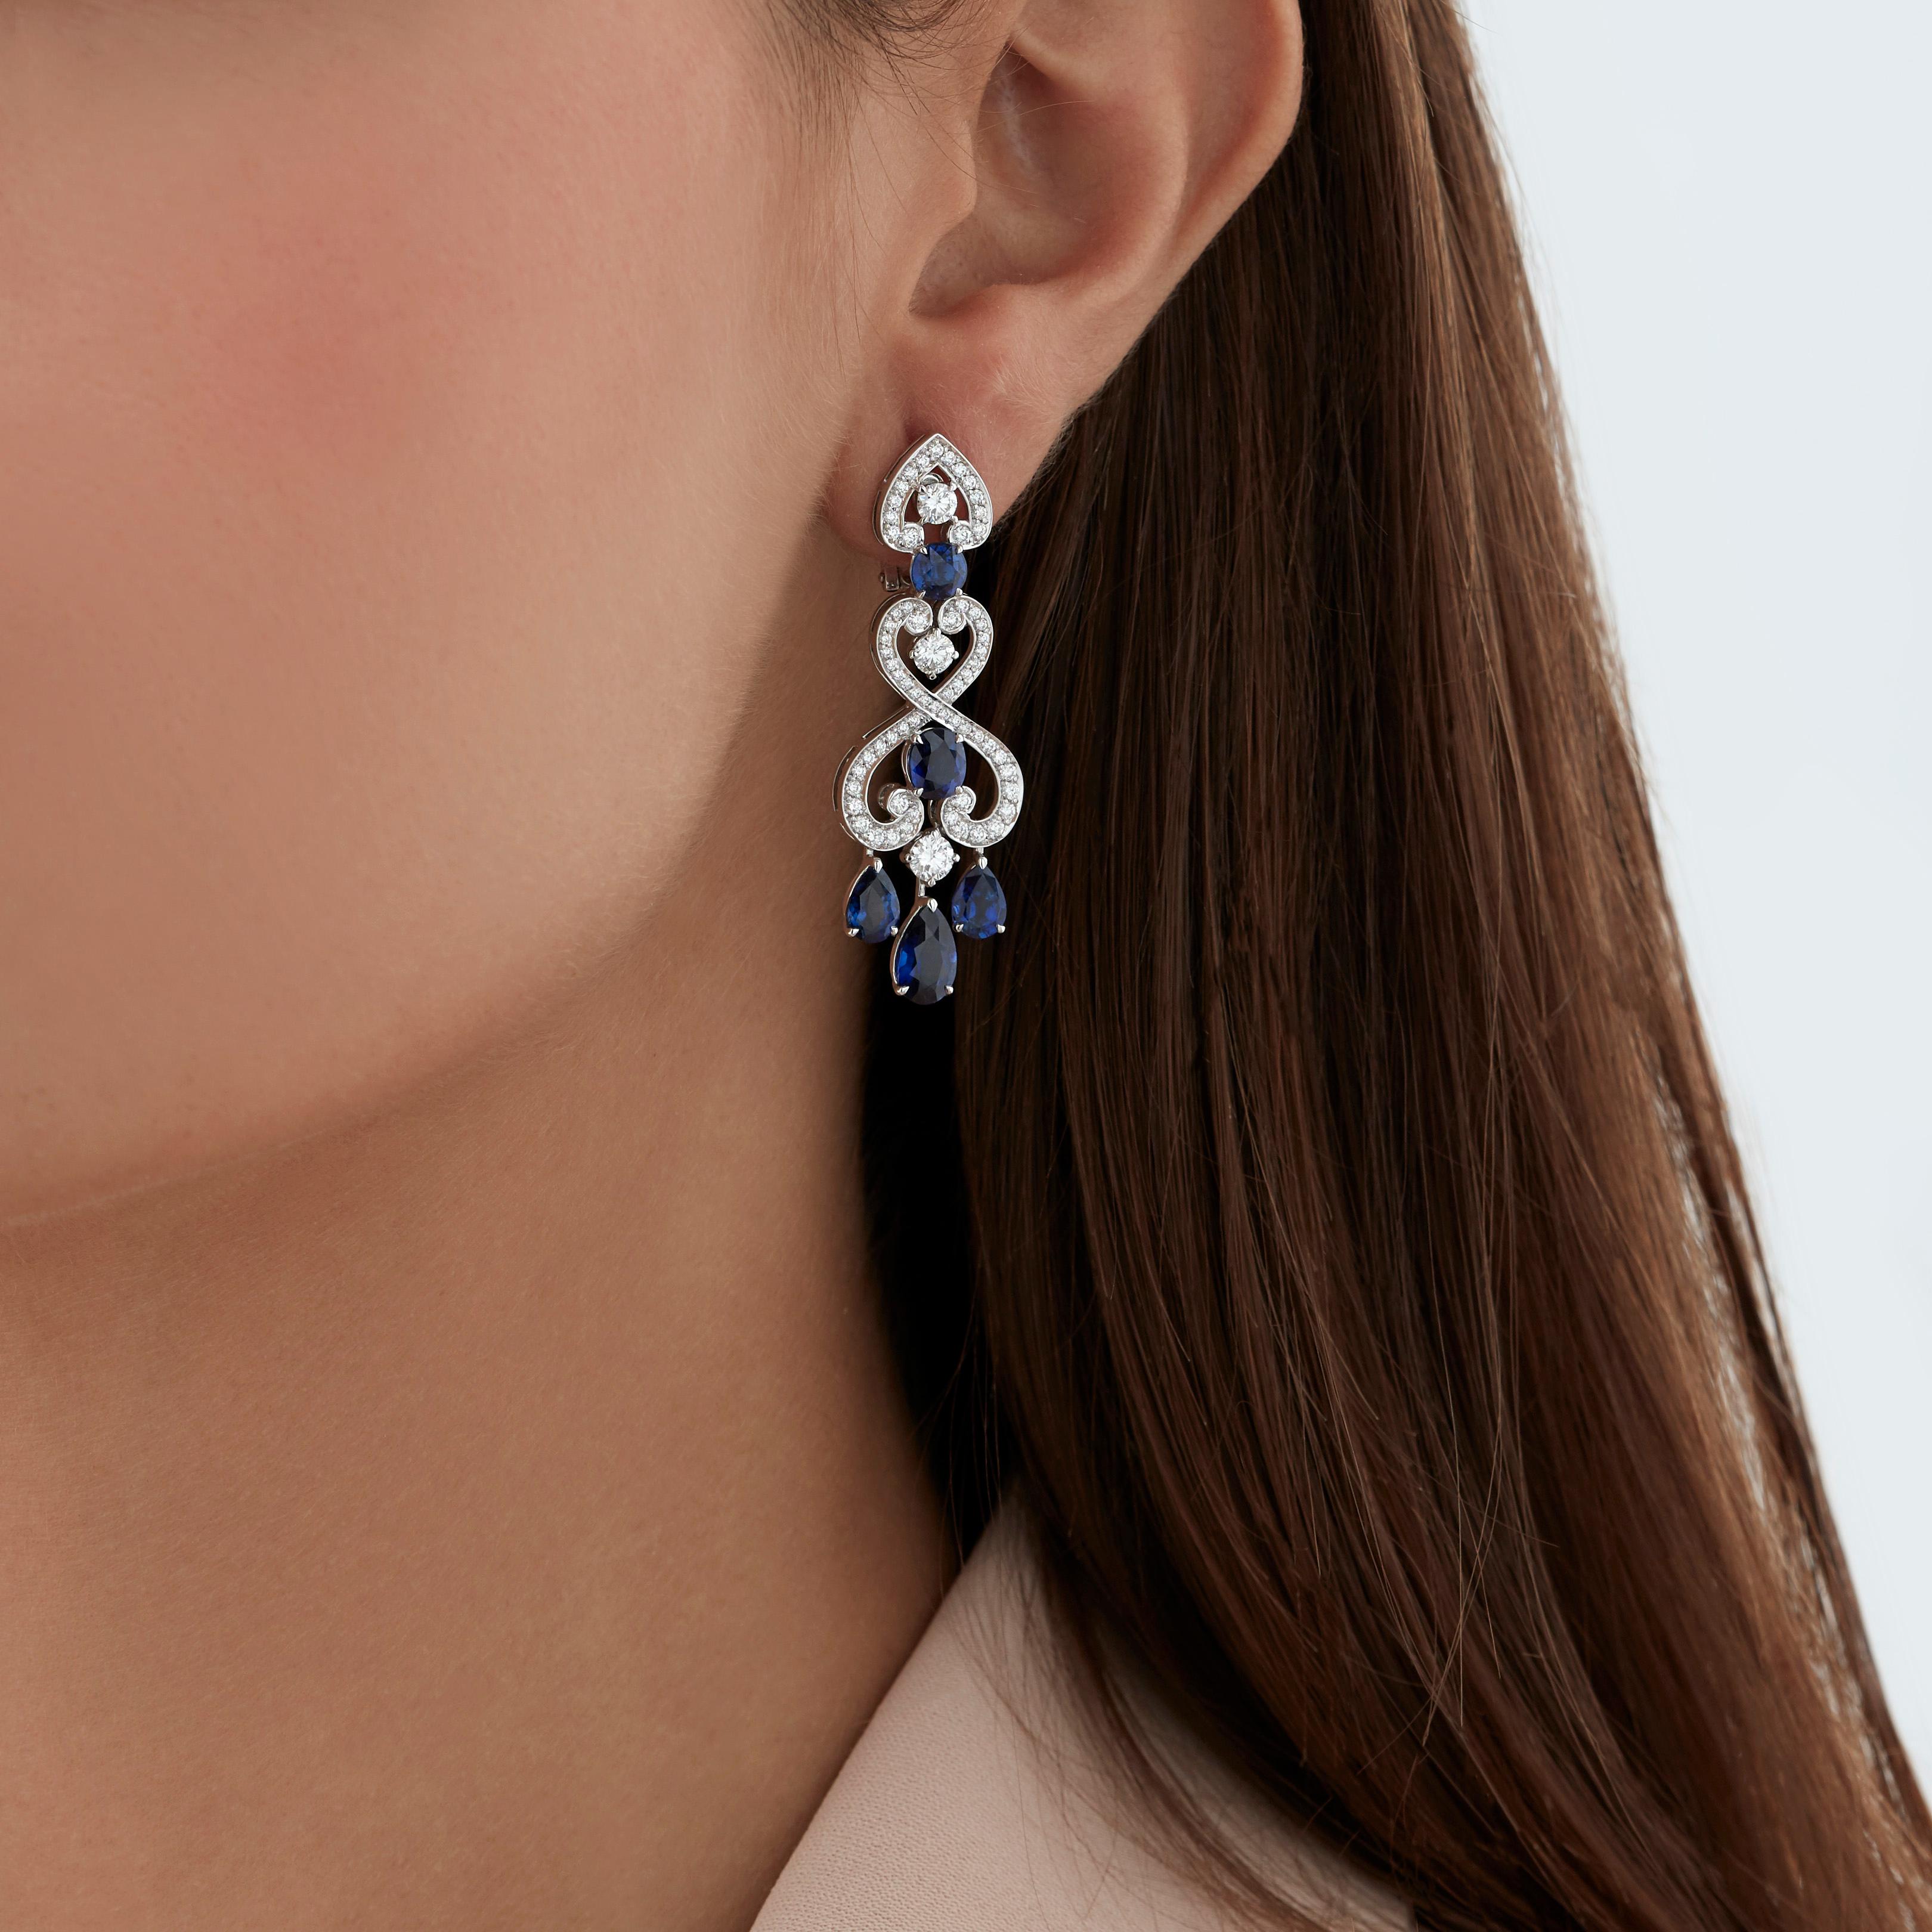 A House of Garrard pair of 18 karat white gold drop earrings from the 'Regal Cascade' collection, set with round white diamonds and round, oval and pearshape blue sapphires.

136 round white diamonds weighing: 1.75cts
2 round blue sapphires